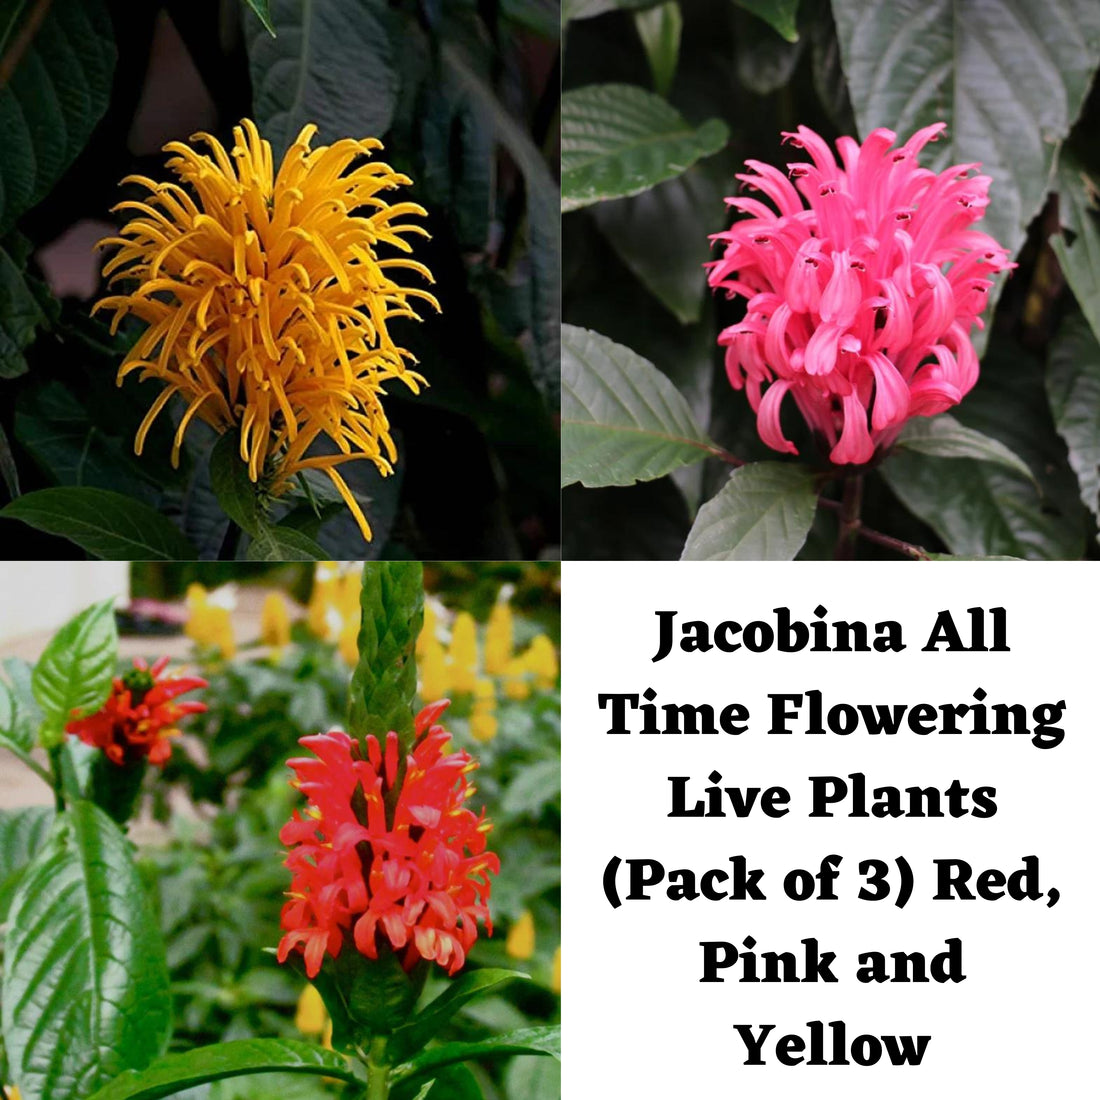 Jacobina All Time Flowering Live Plants (Pack of 3) Red, Pink and Yellow